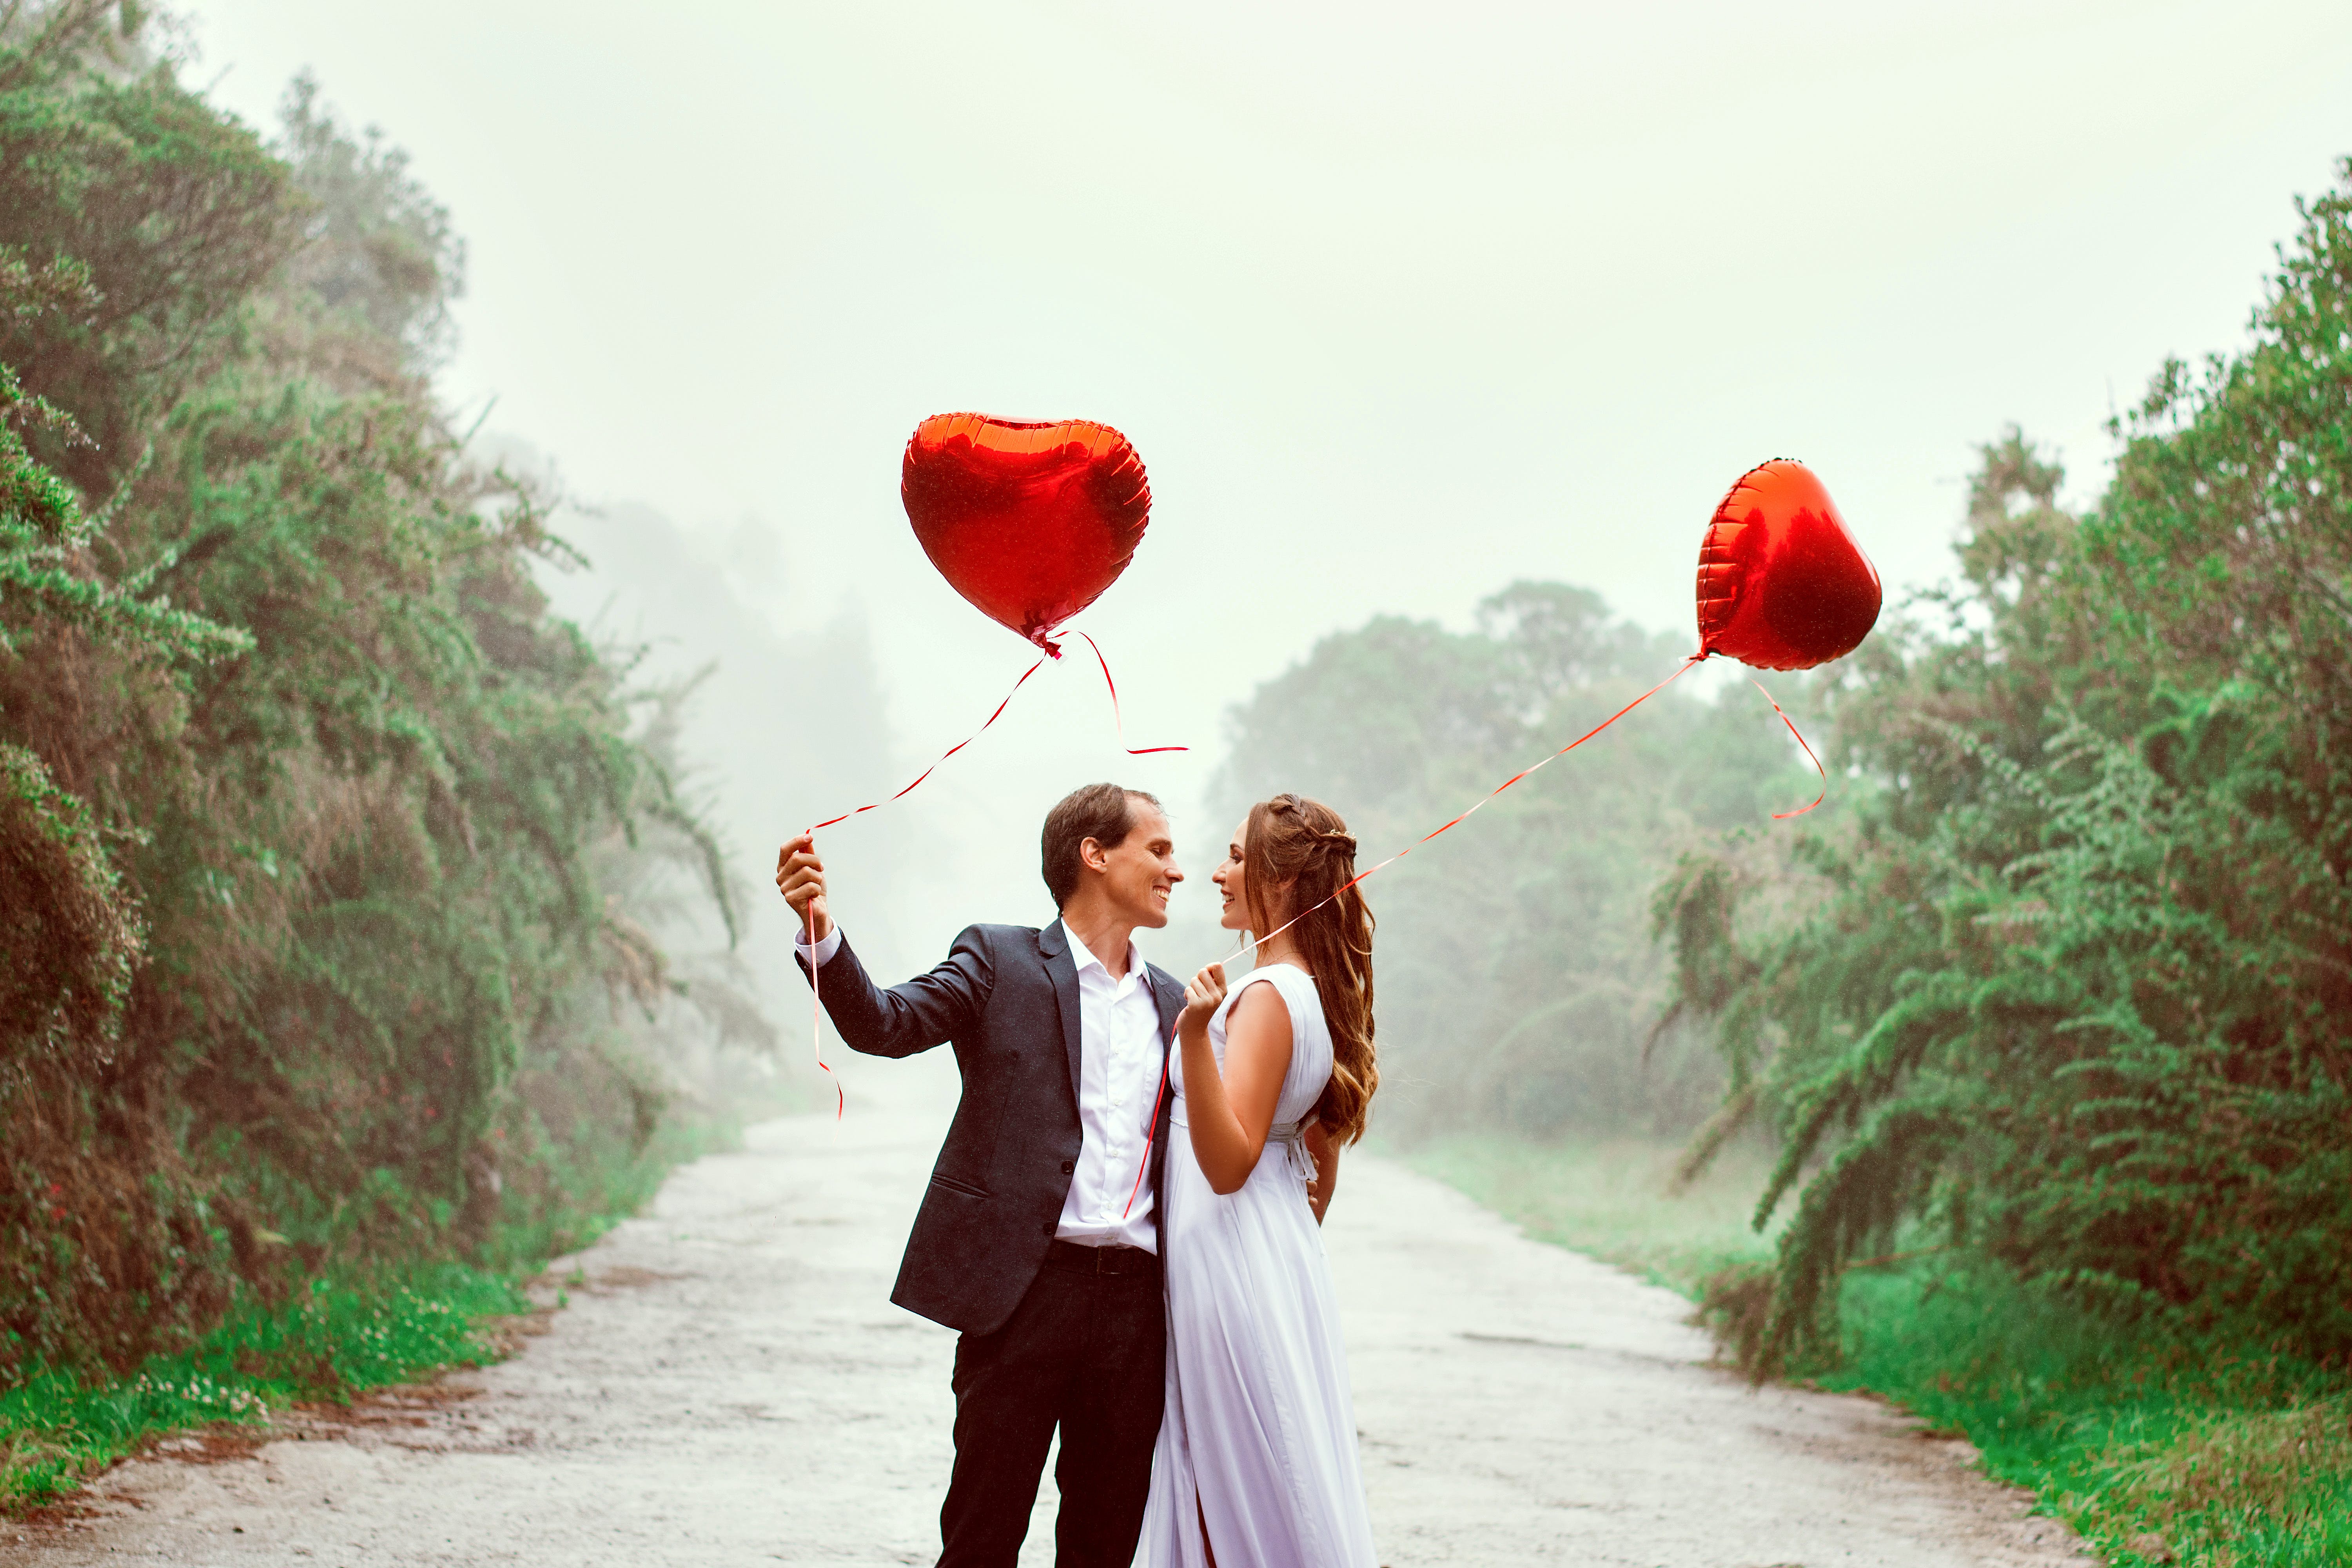 man and woman holding hands while holding red heart-shaped balloons